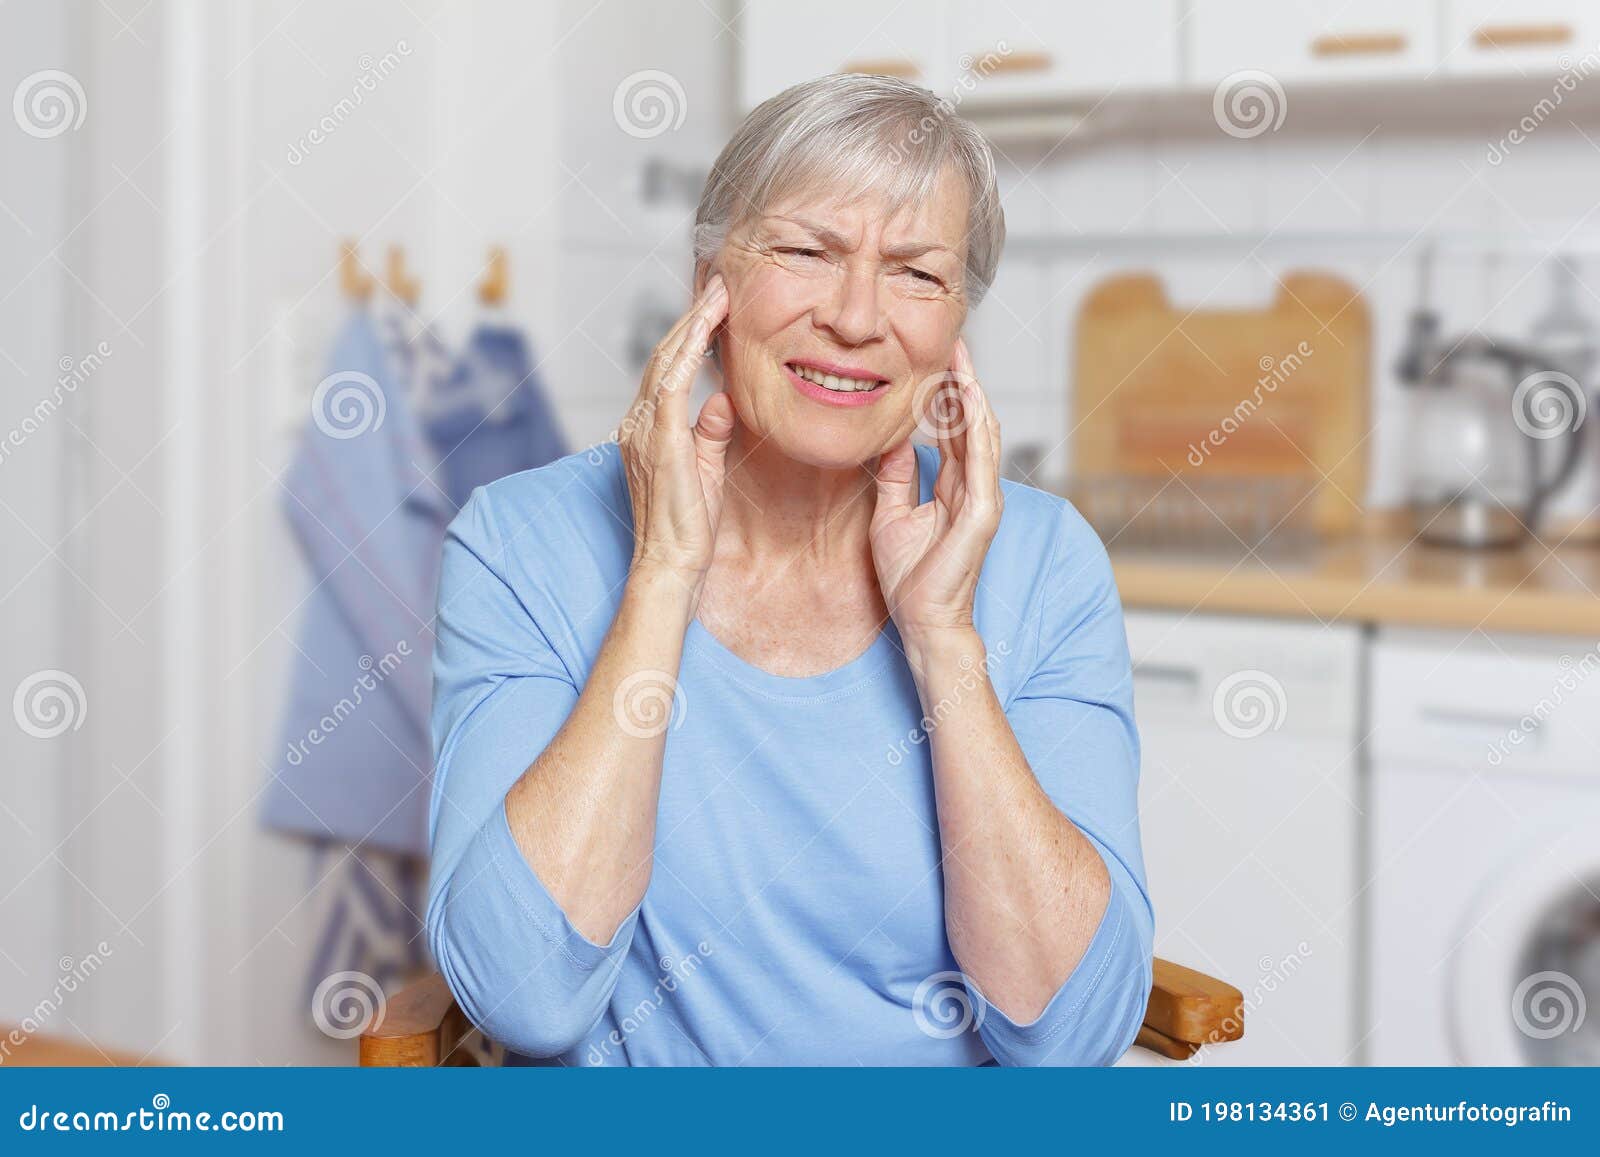 temporal arteritis woman painful jaw joints